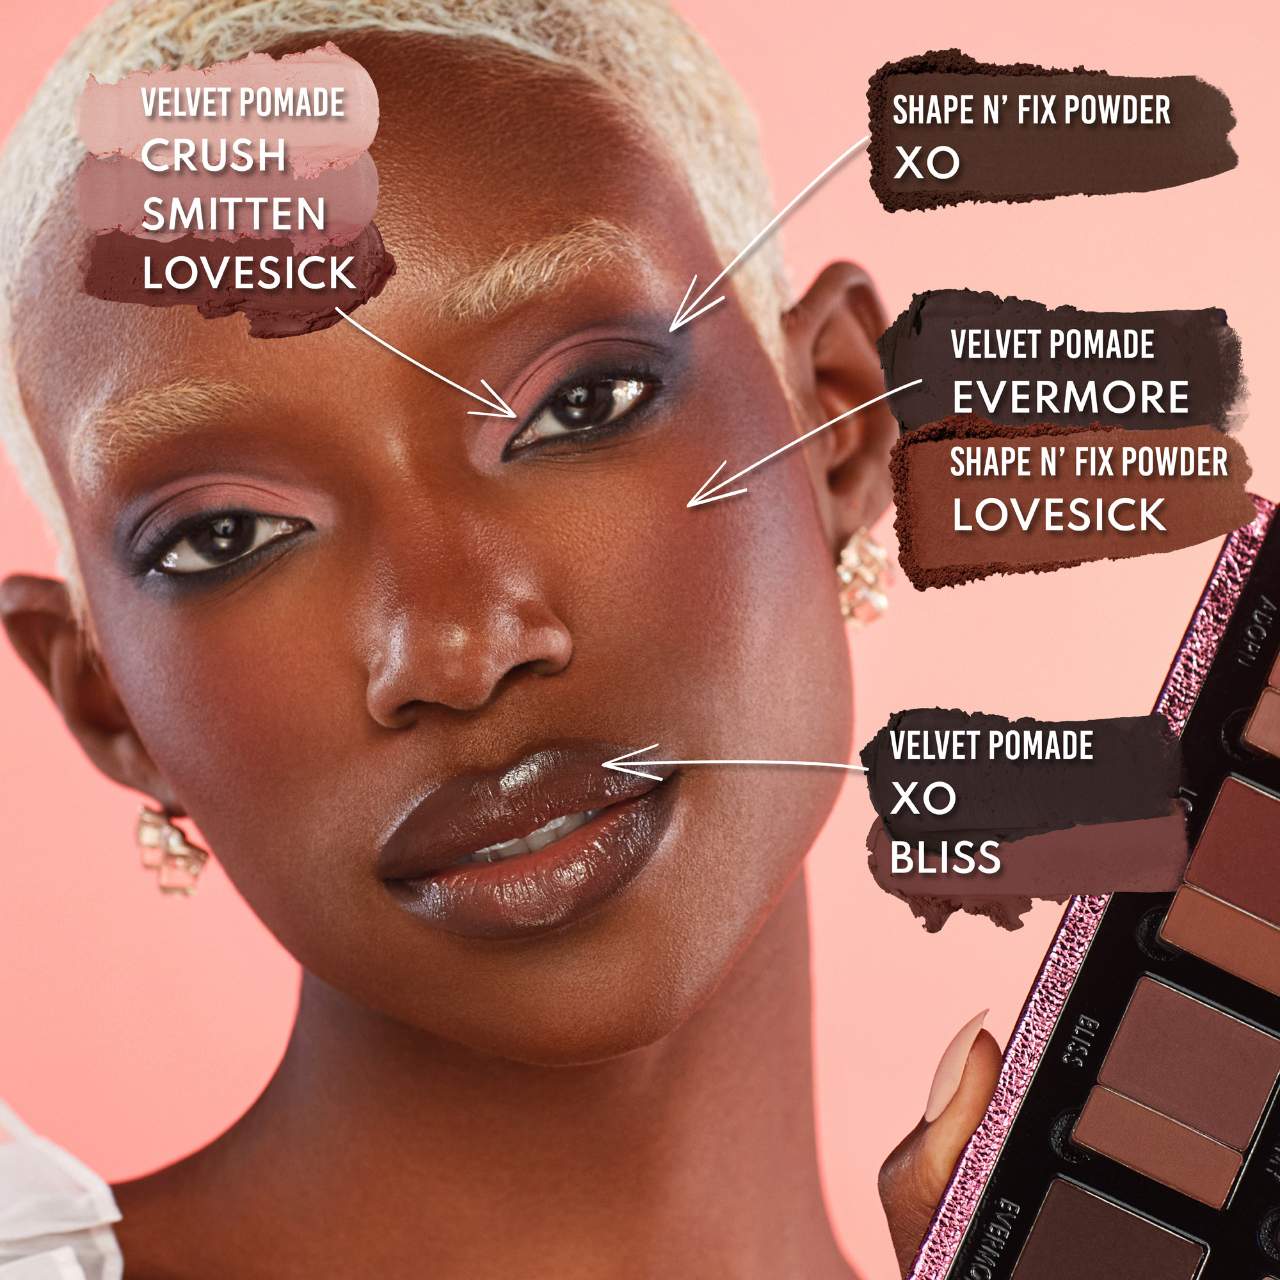 Groundwork: Blooming Romance - Palette For Eyes, Brows, Face & Lips